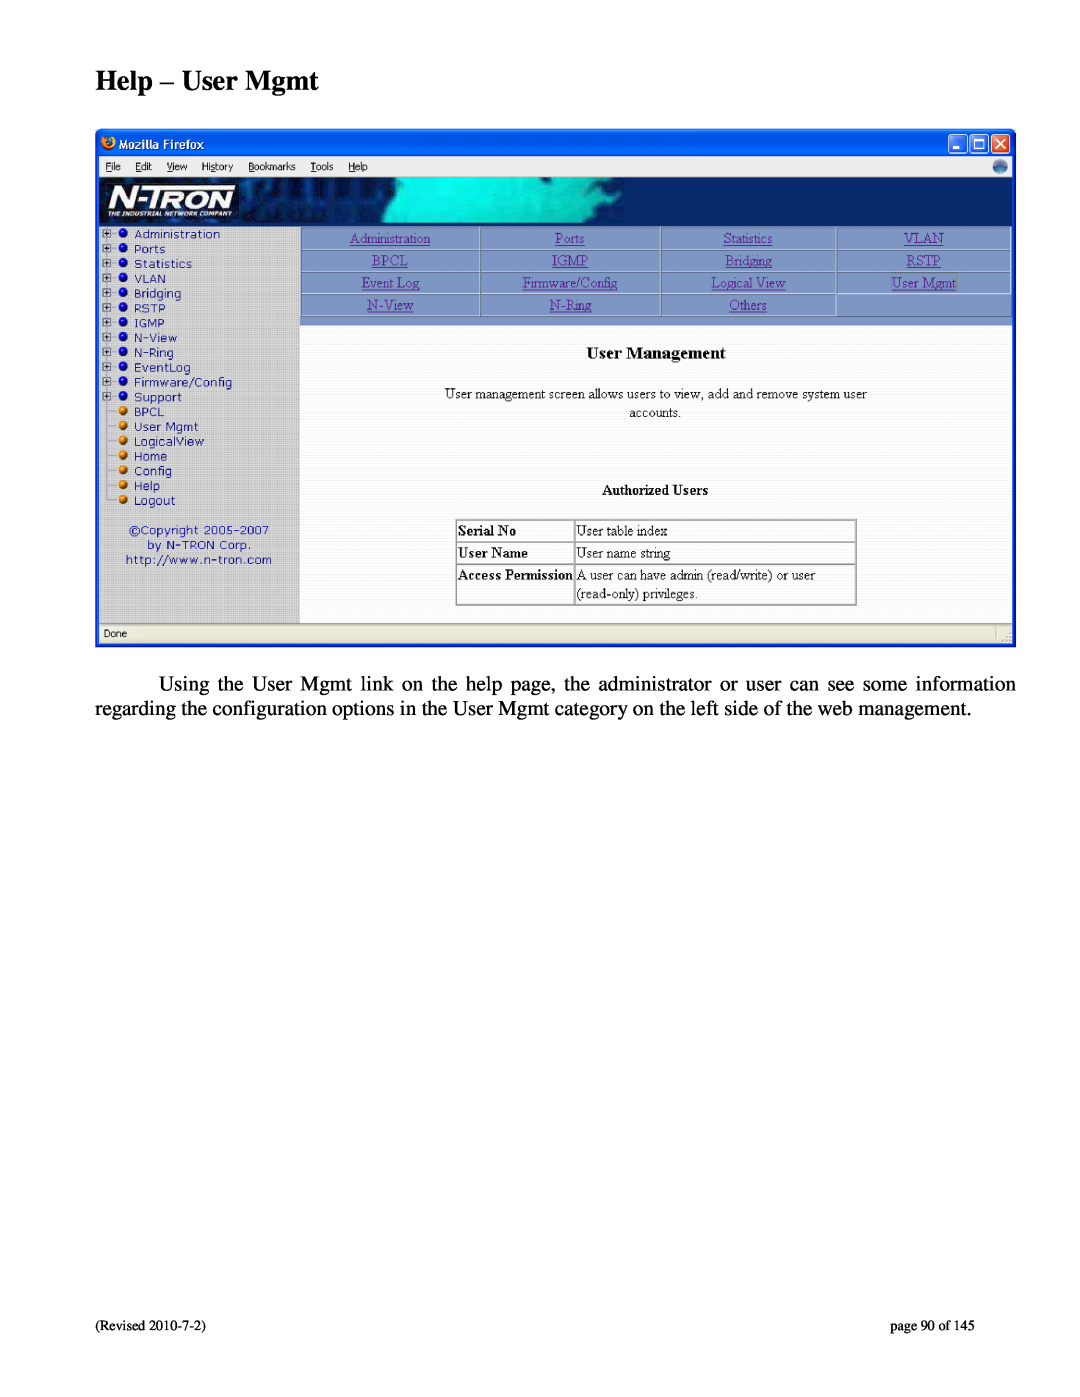 N-Tron 9000 user manual Help - User Mgmt, page 90 of 